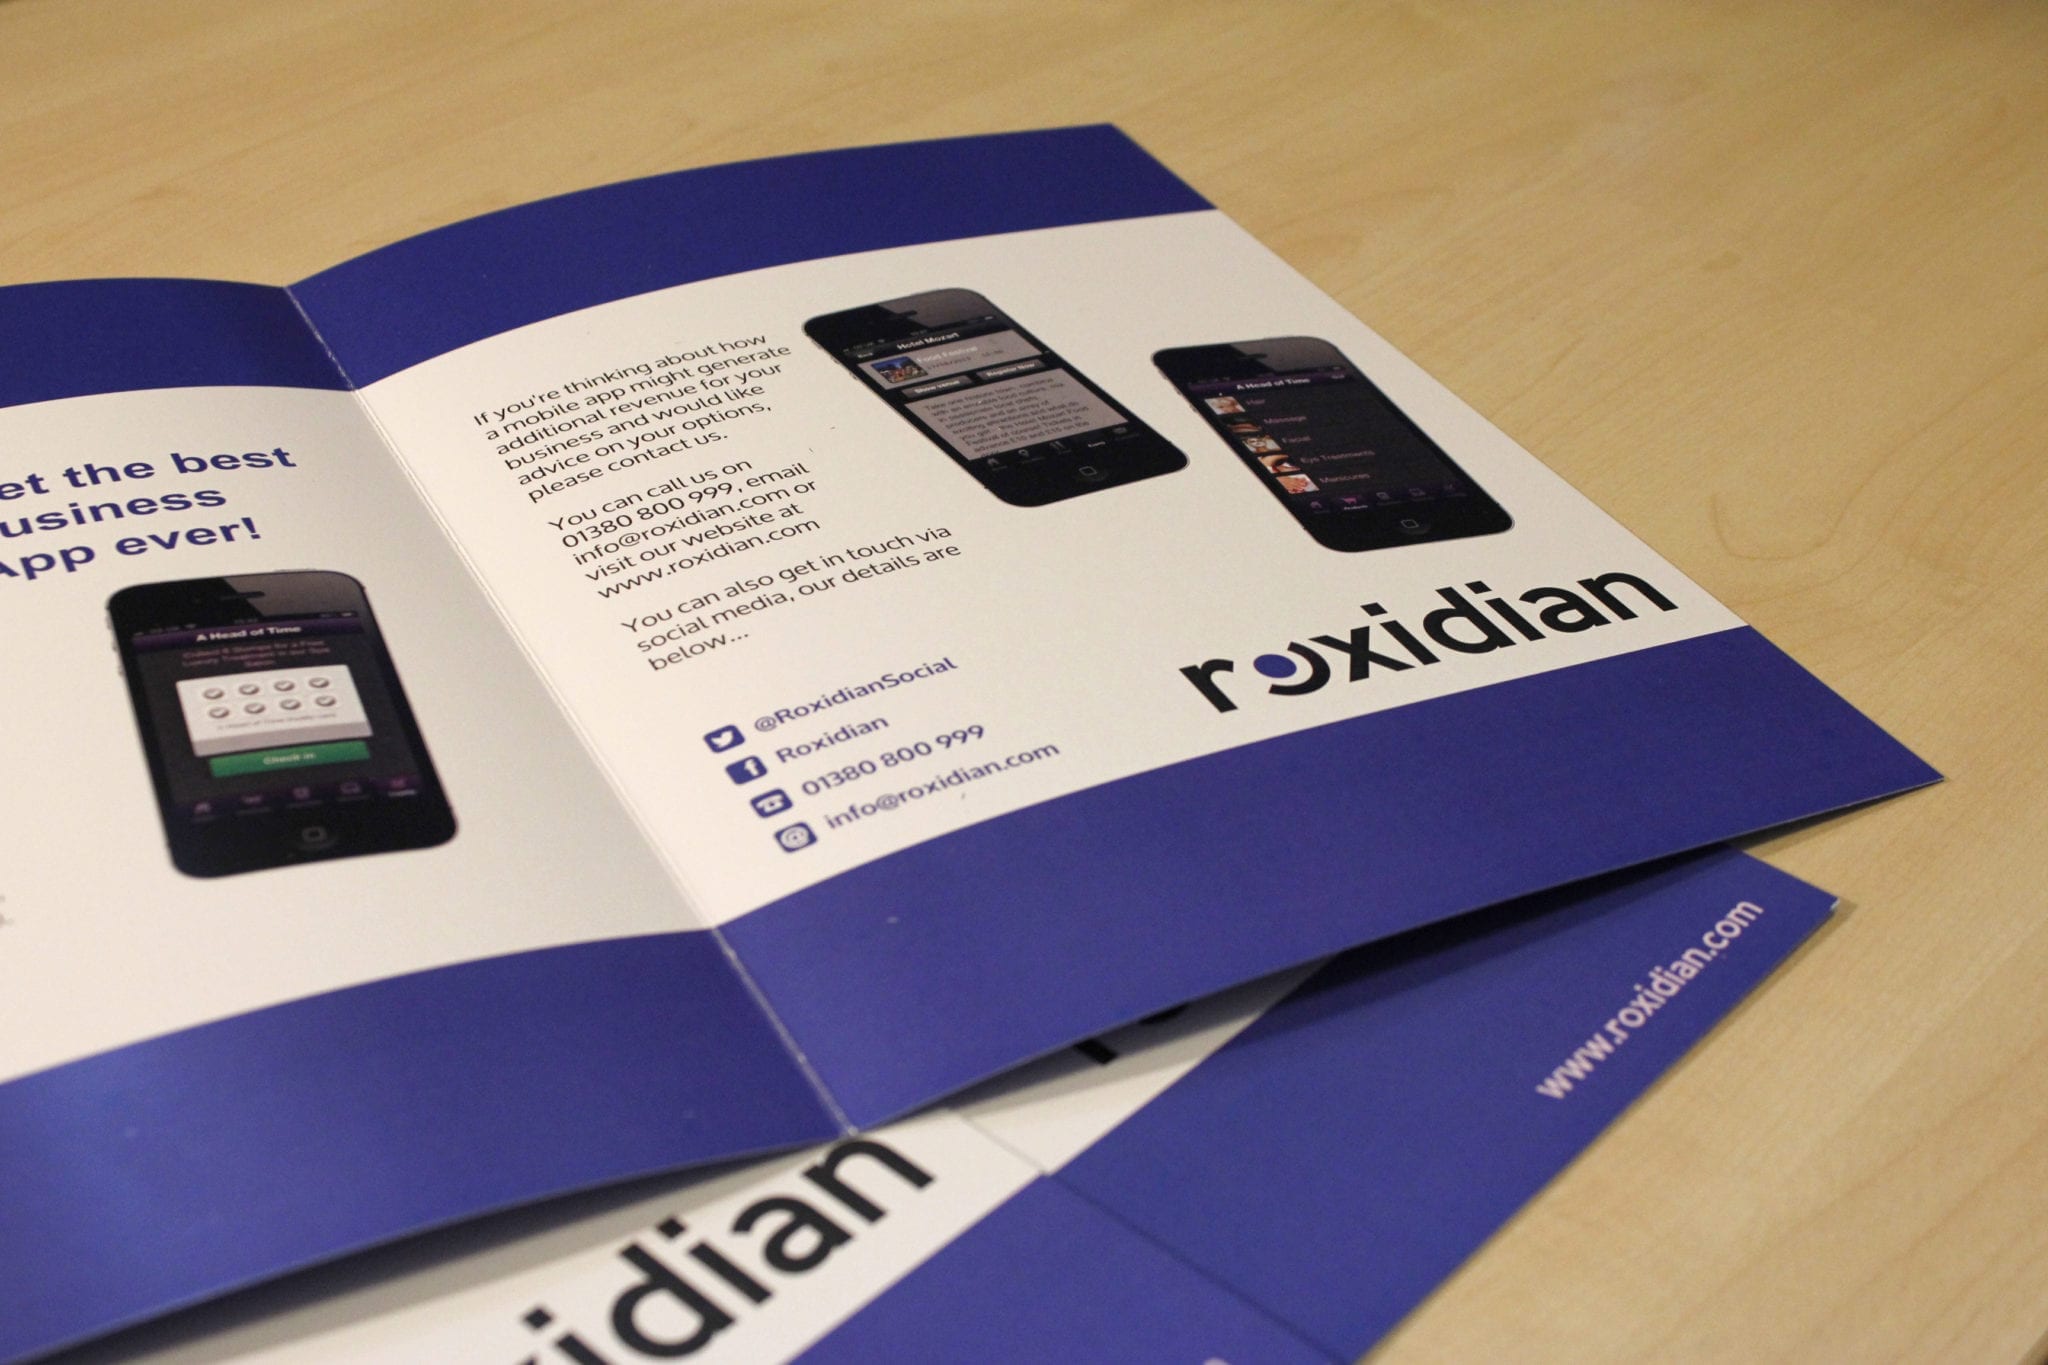 design-and-print-of-promotional-materials-for-roxidian.jpg